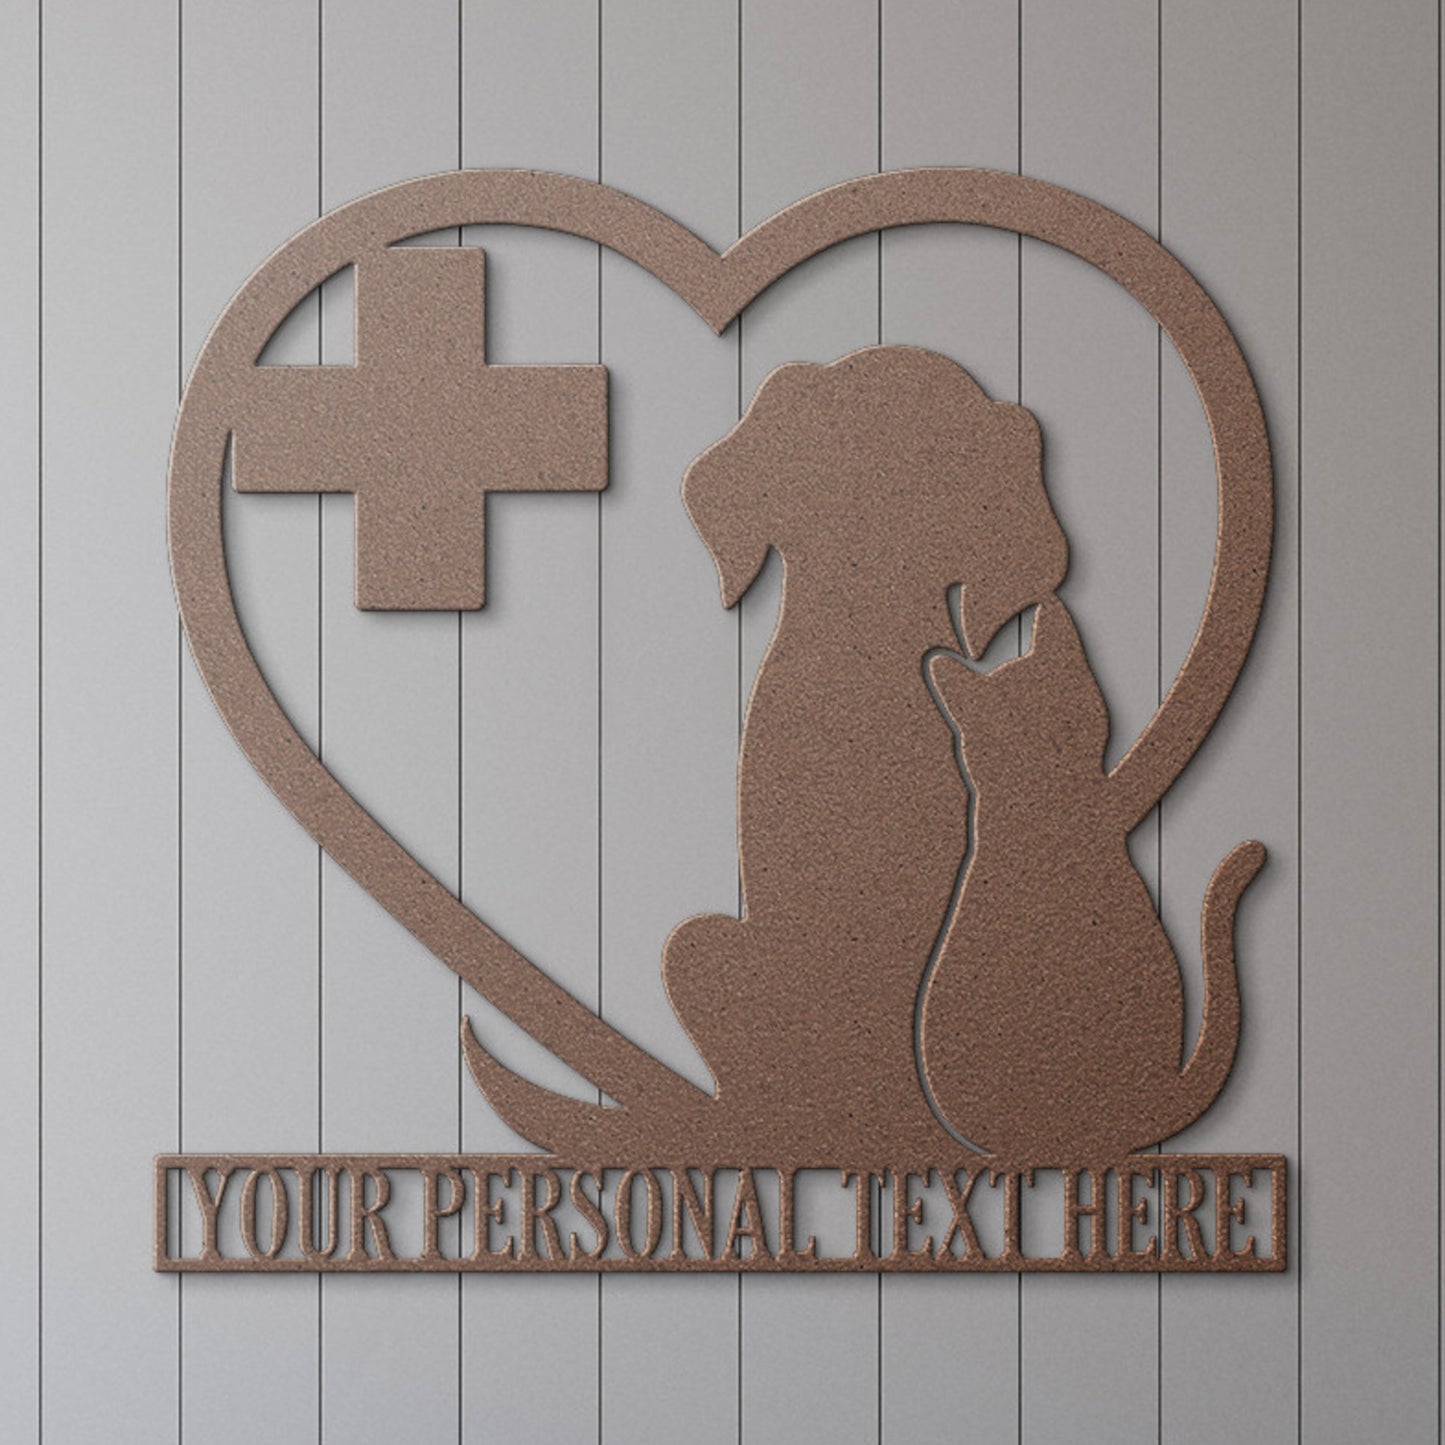 Personalized Vet Pet Care Name Metal Sign. Customizable Vet Doctor Wall Decor. Vet Healthcare Sign. Dog And Cat Name Decor. Veterinary Gift